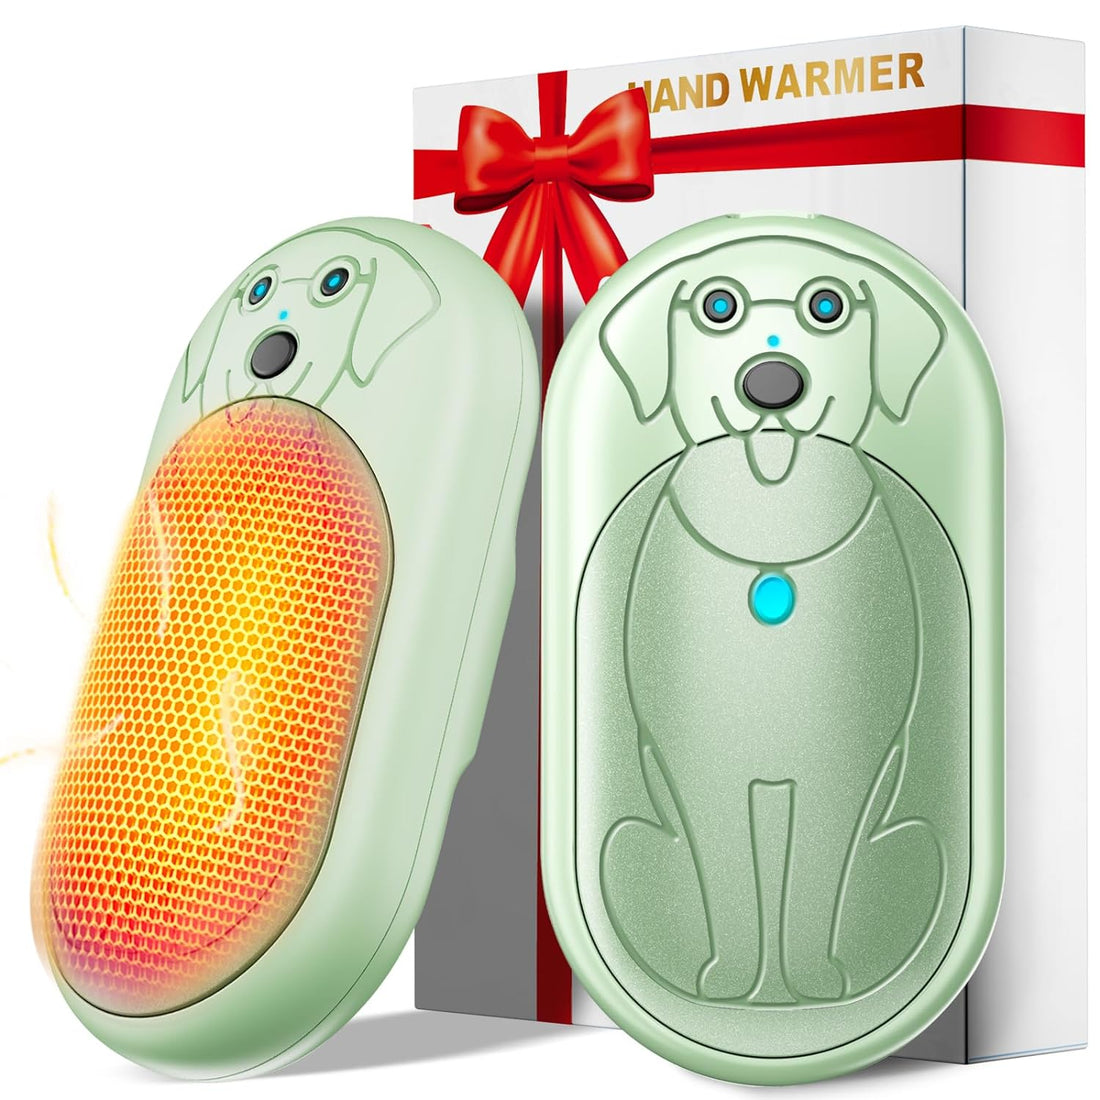 Electric Hand Warmers Rechargeable 2 Pack, 6000Mah Portable Hand Warmer Battery Operated 20H Lasting, Men Women Gifts for Chrismas, Outdoor Camping, Hunting Gear